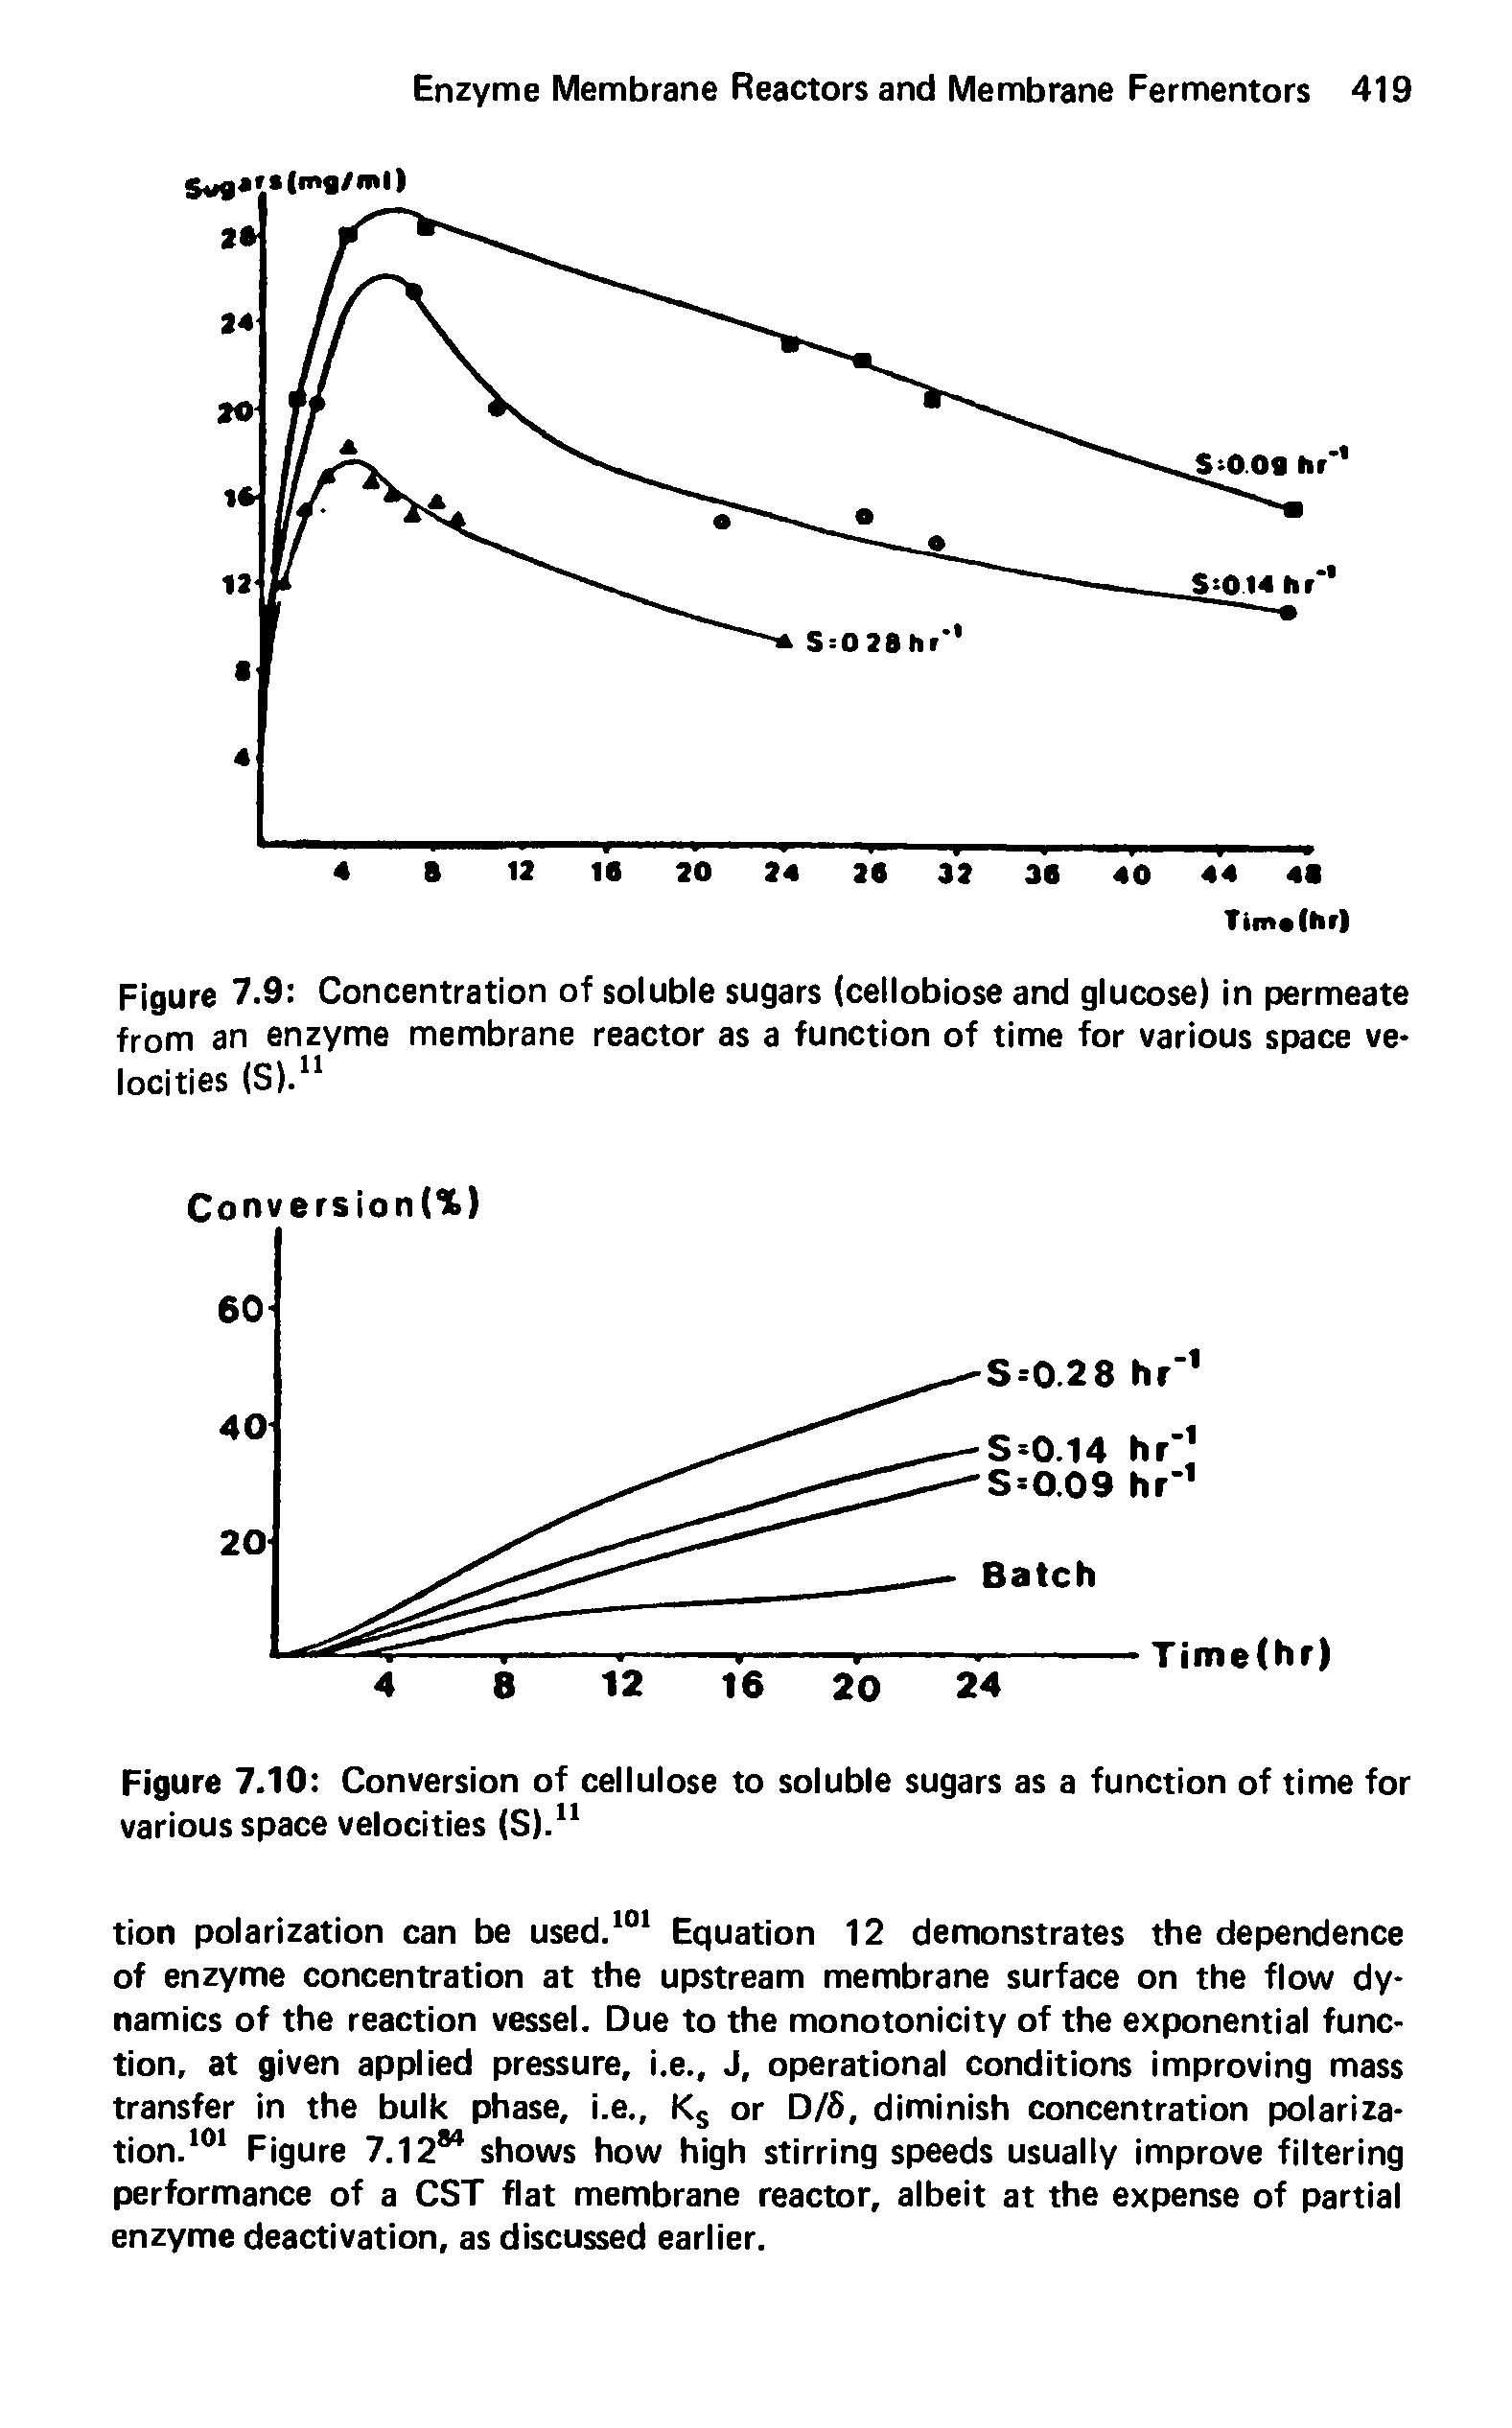 Figure 7.9 Concentration of soluble sugars (cellobiose and glucose) in permeate from an enzyme membrane reactor as a function of time for various space velocities (S).11...